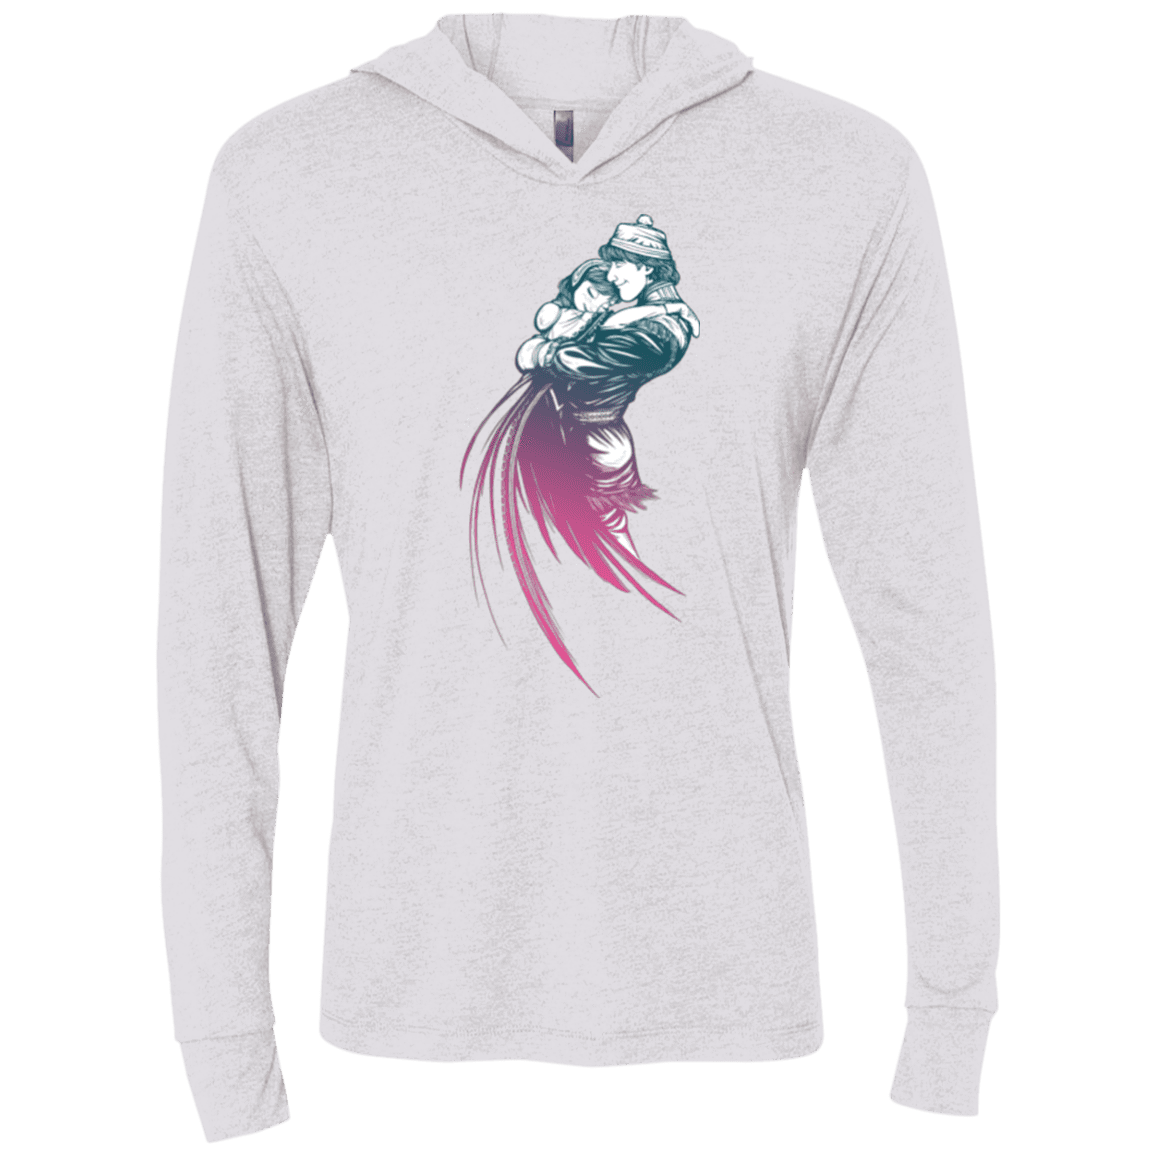 T-Shirts Heather White / X-Small Frozen Fantasy 2 Triblend Long Sleeve Hoodie Tee